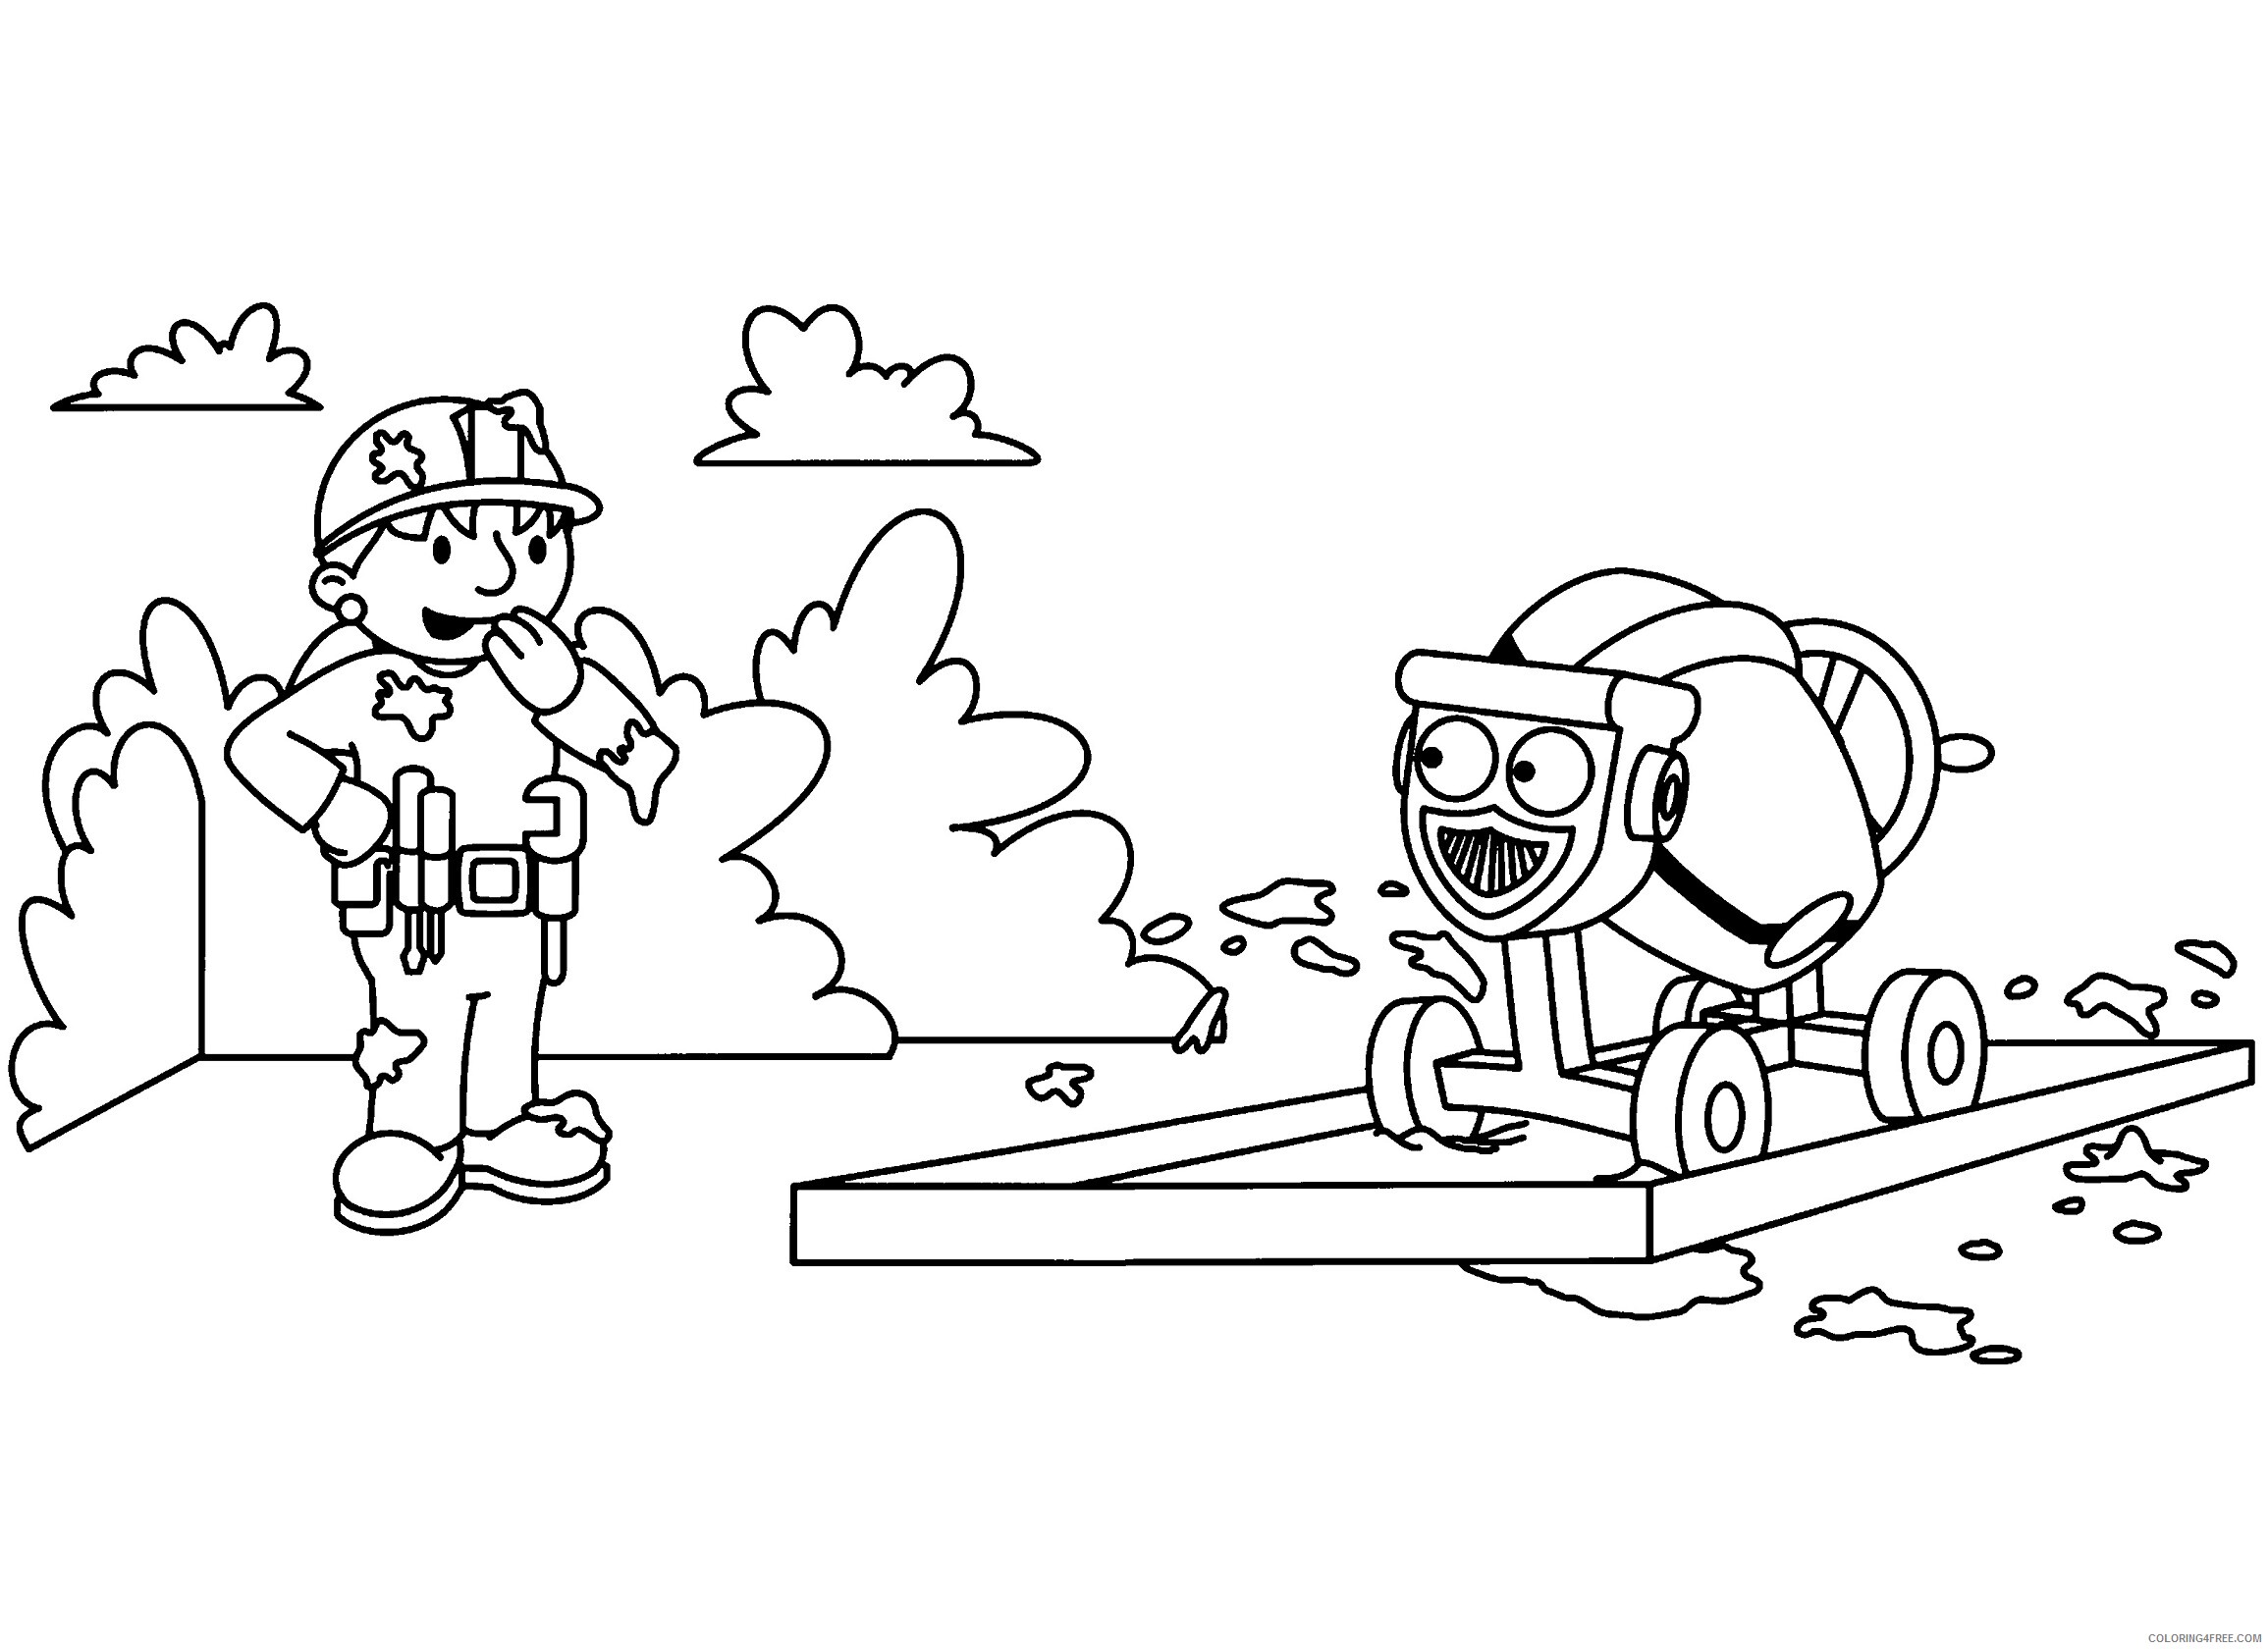 Bob the Builder Coloring Pages TV Film bob der baumeister Printable 2020 00950 Coloring4free